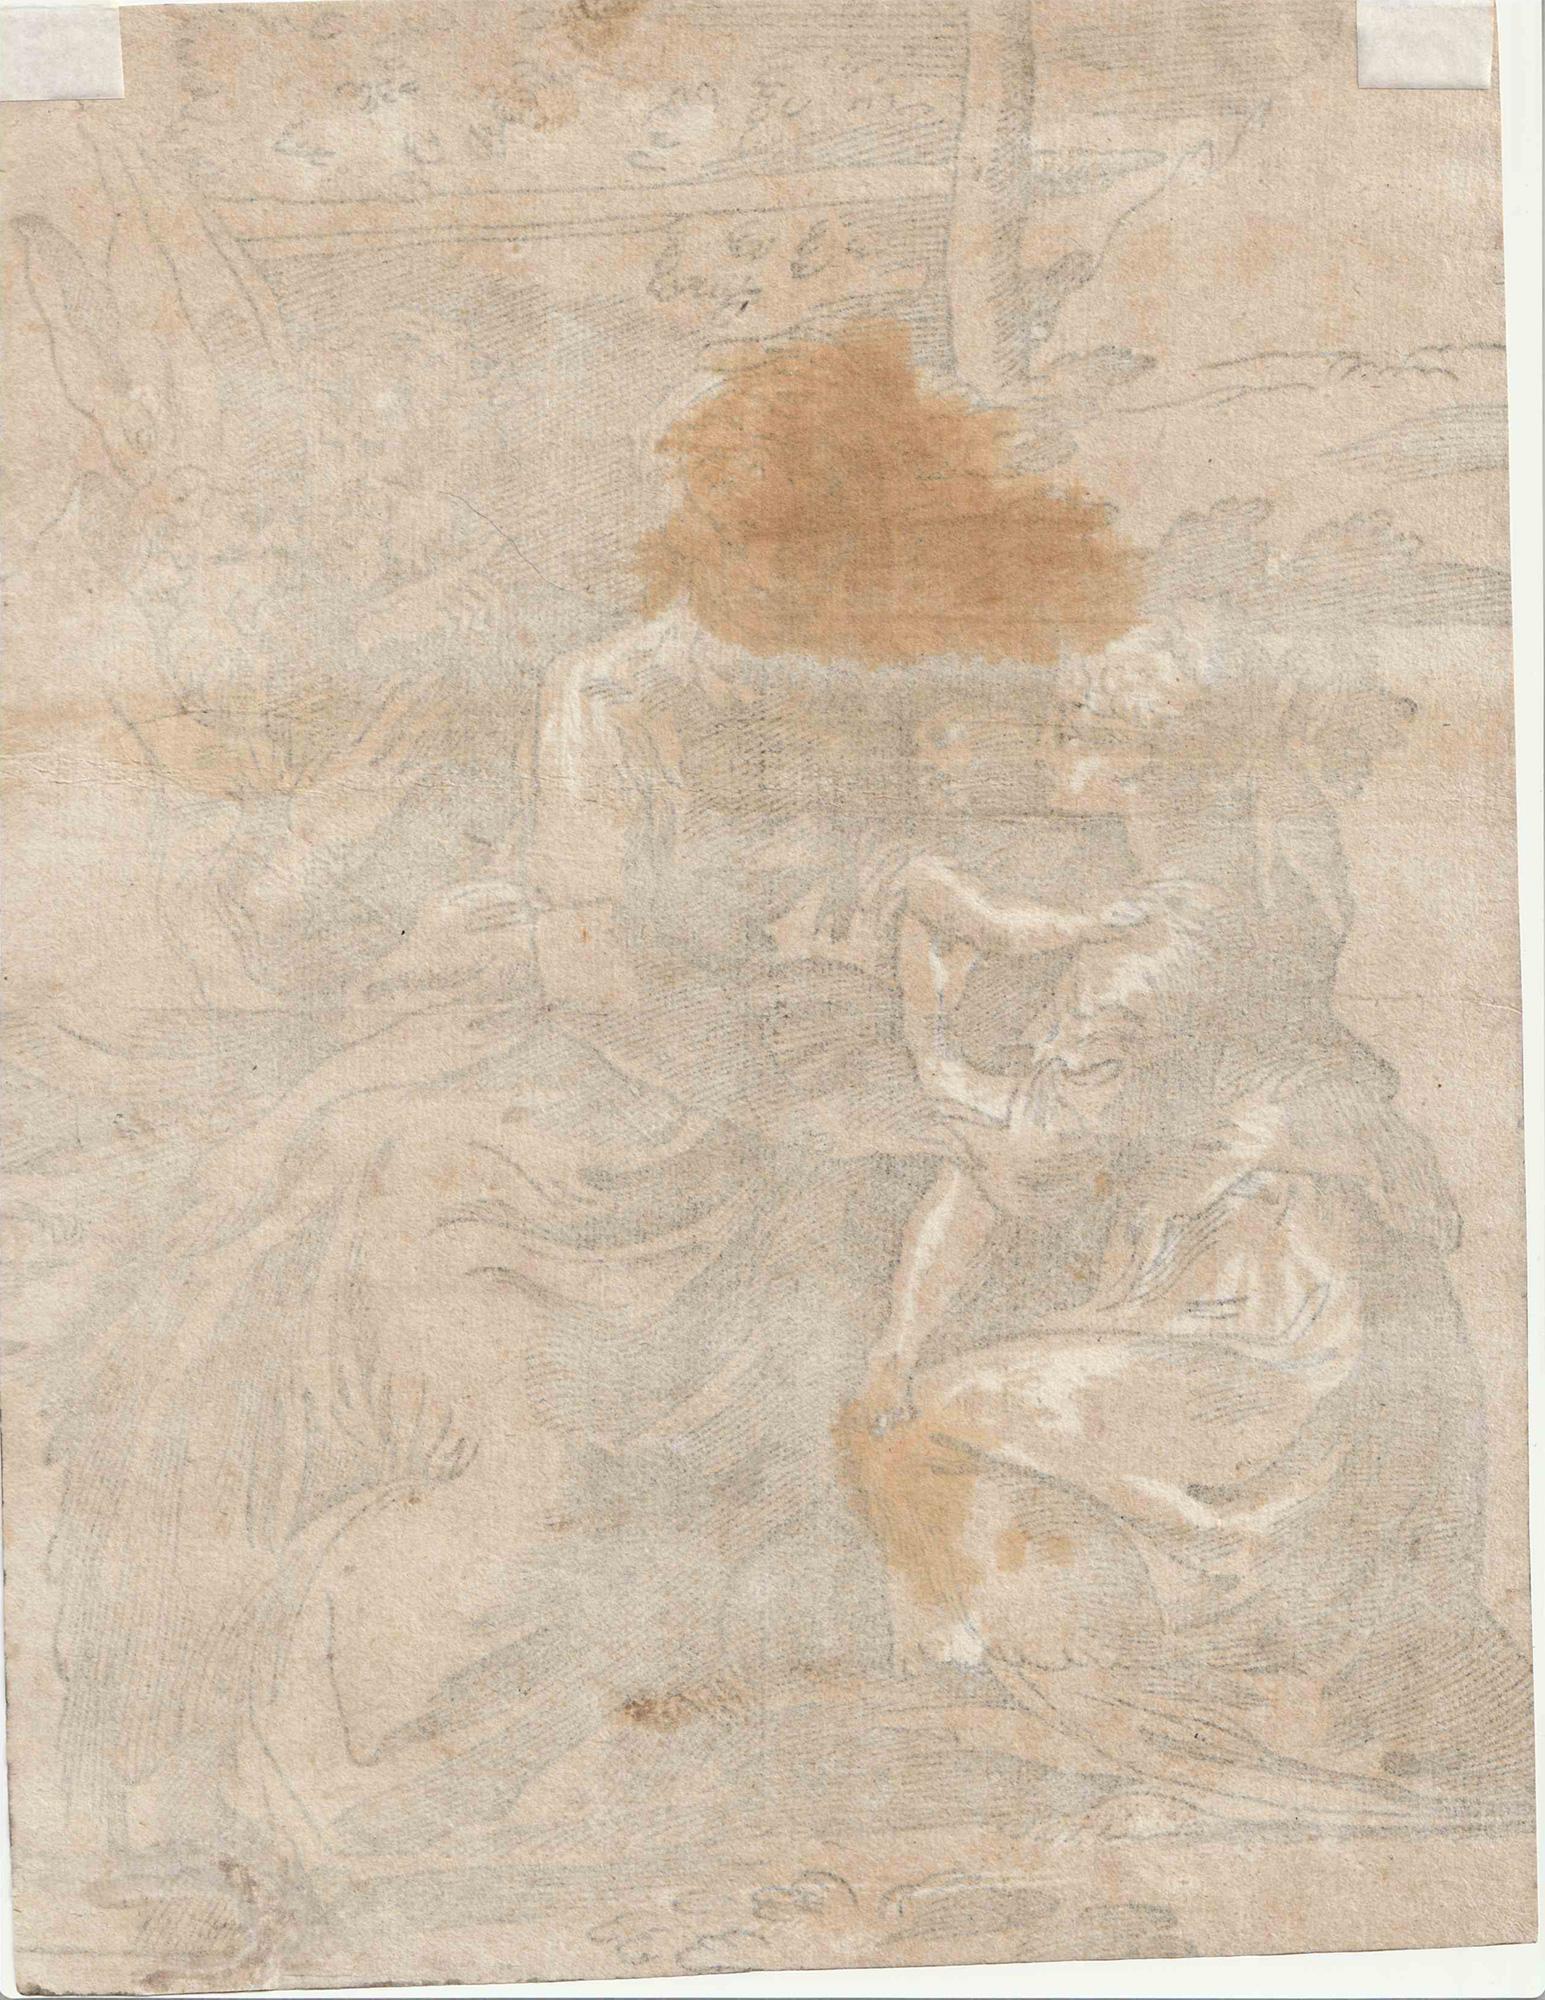 Holy Family with Two Saints, after Parmigianino - Print by Antonio Da Trento